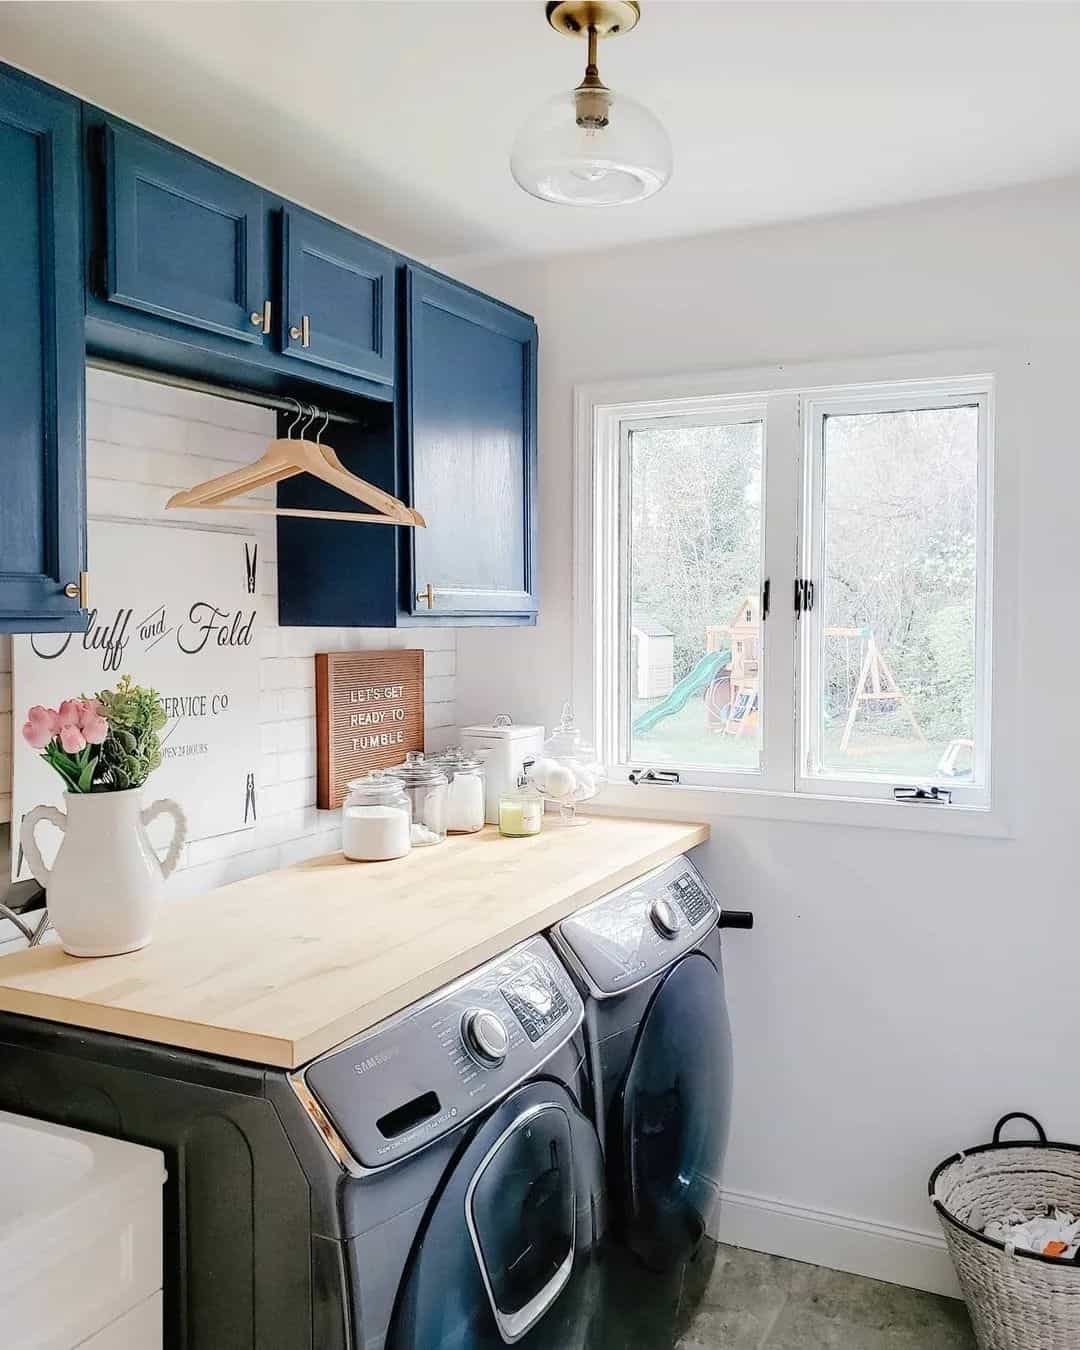 Warm Laundry Room With Navy Blue Cabinets - Soul & Lane